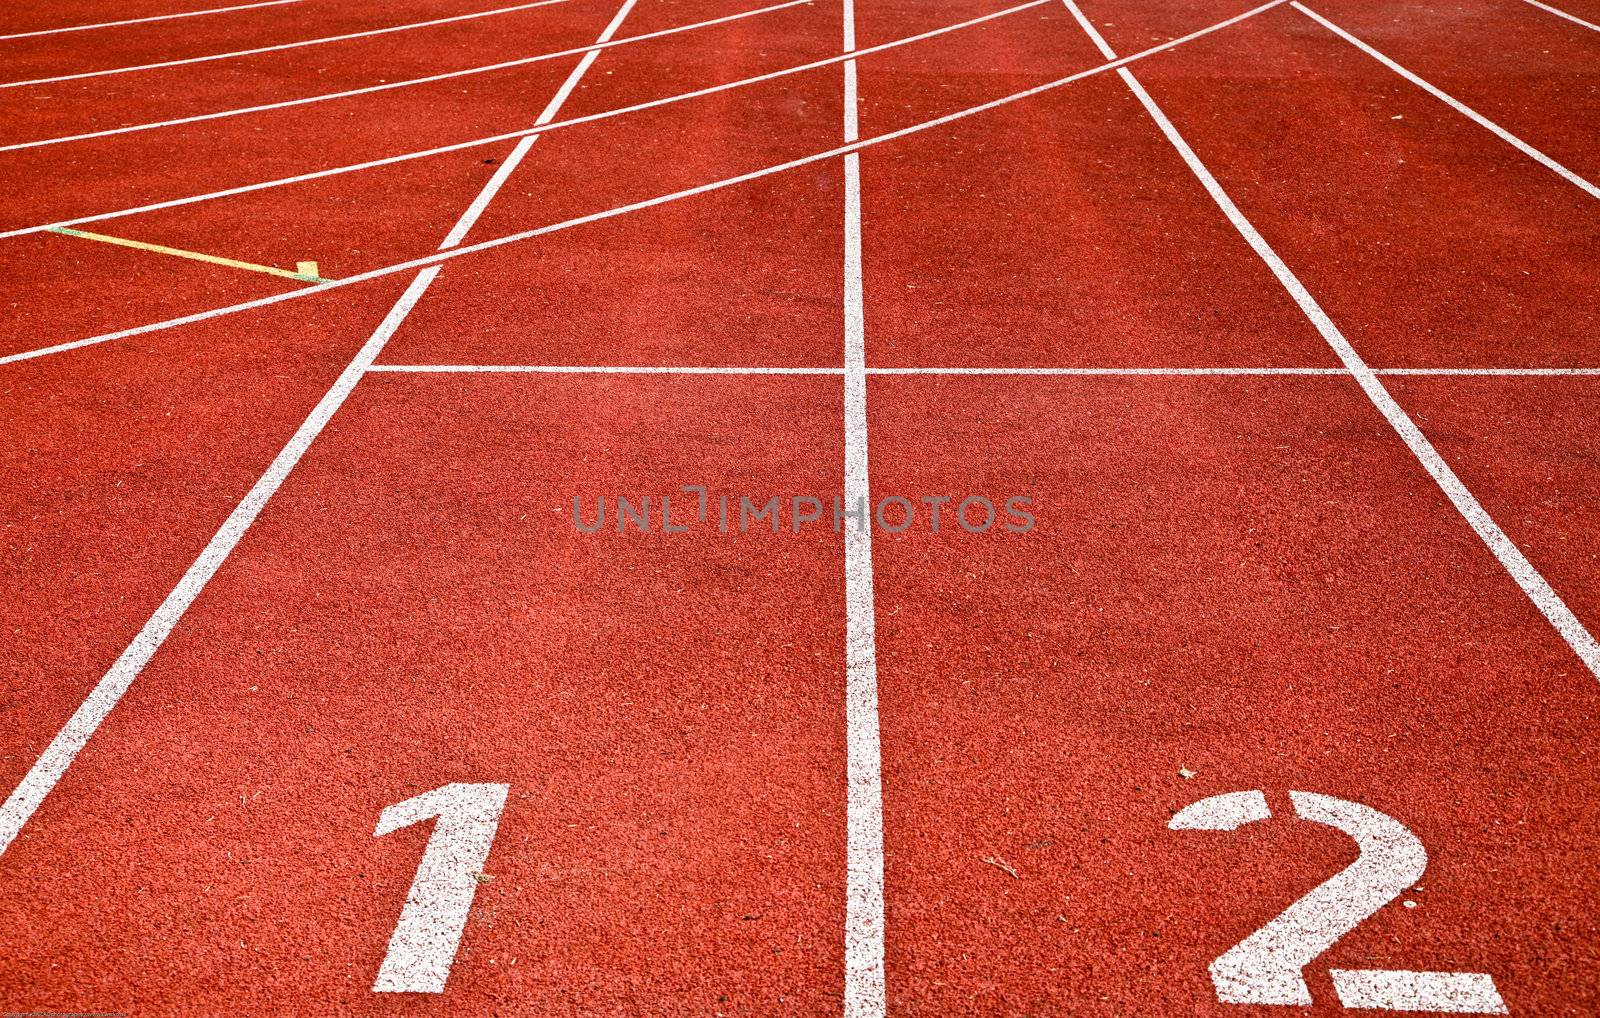 Running Track Lanes by nfx702